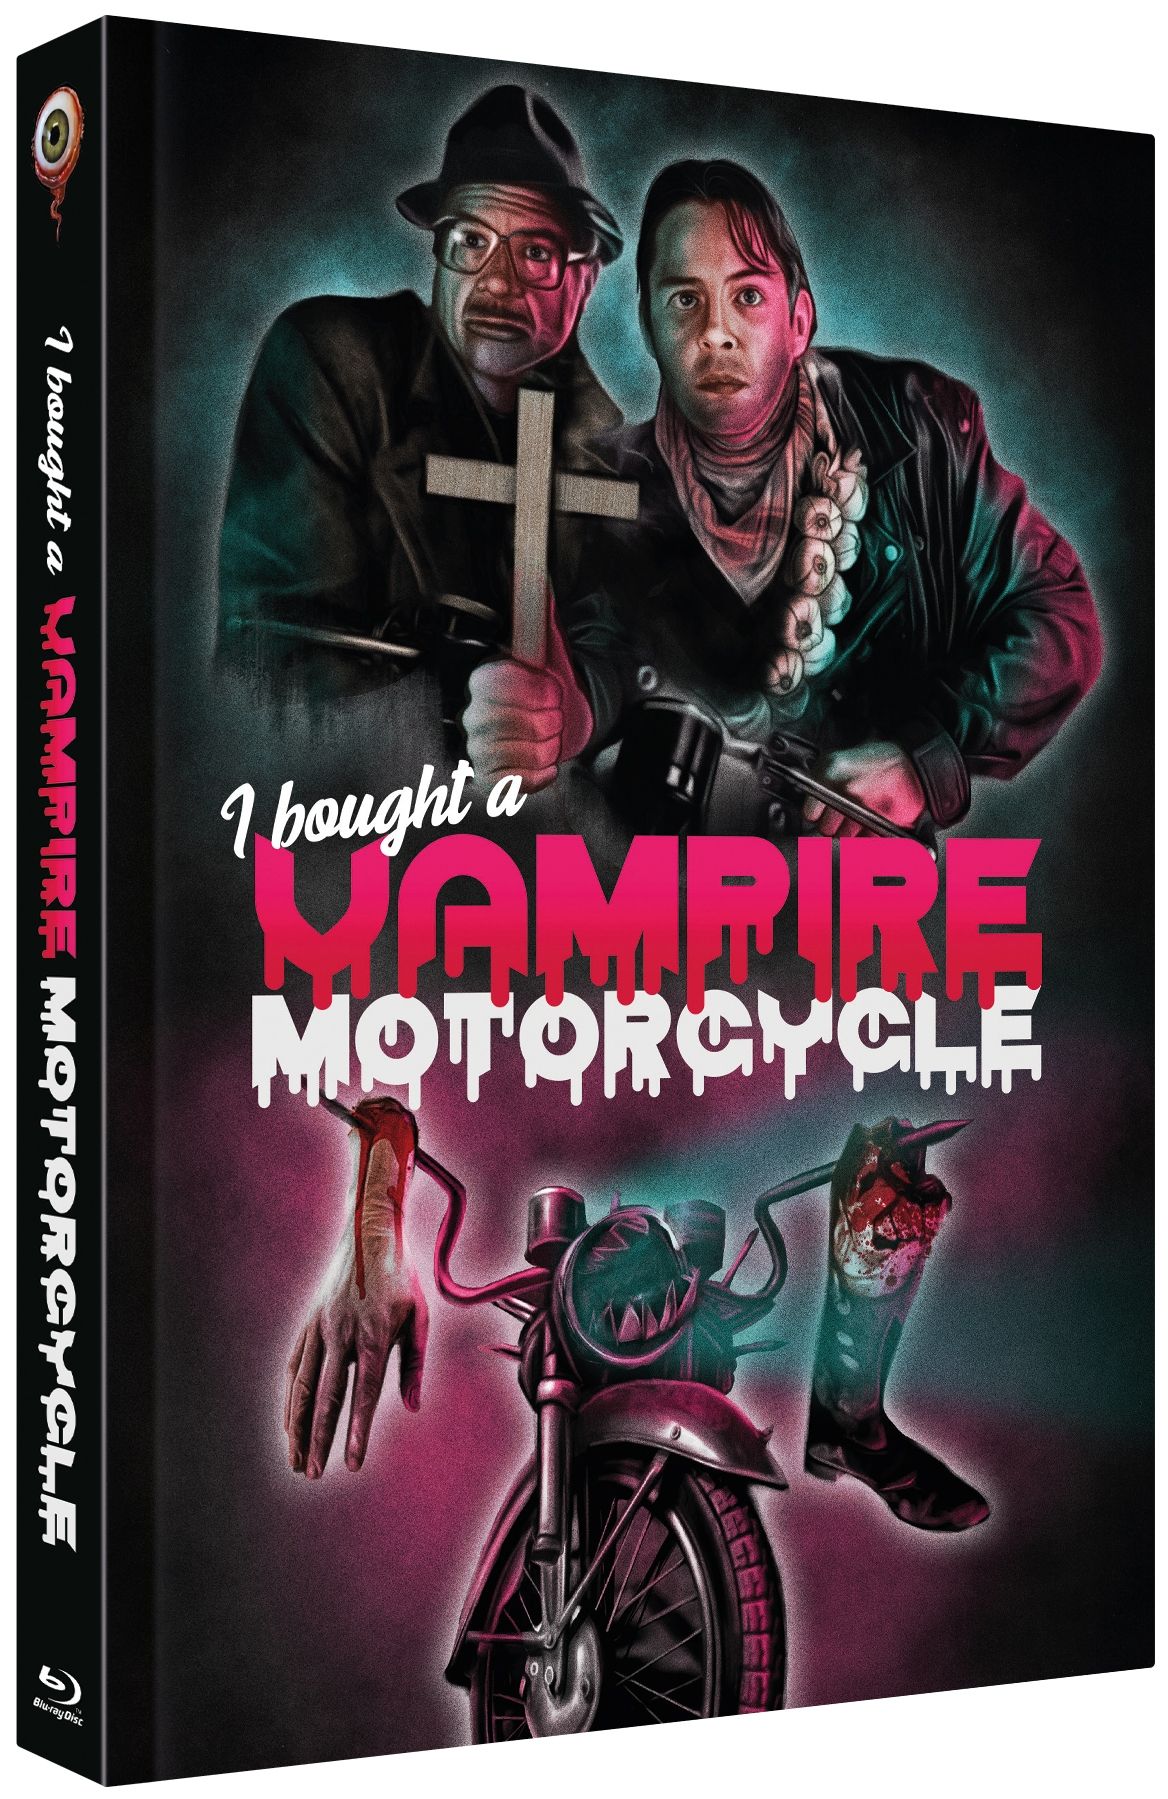 I Bought a Vampire Motorcycle (Lim. Uncut Mediabook - Cover B) (DVD + BLURAY)